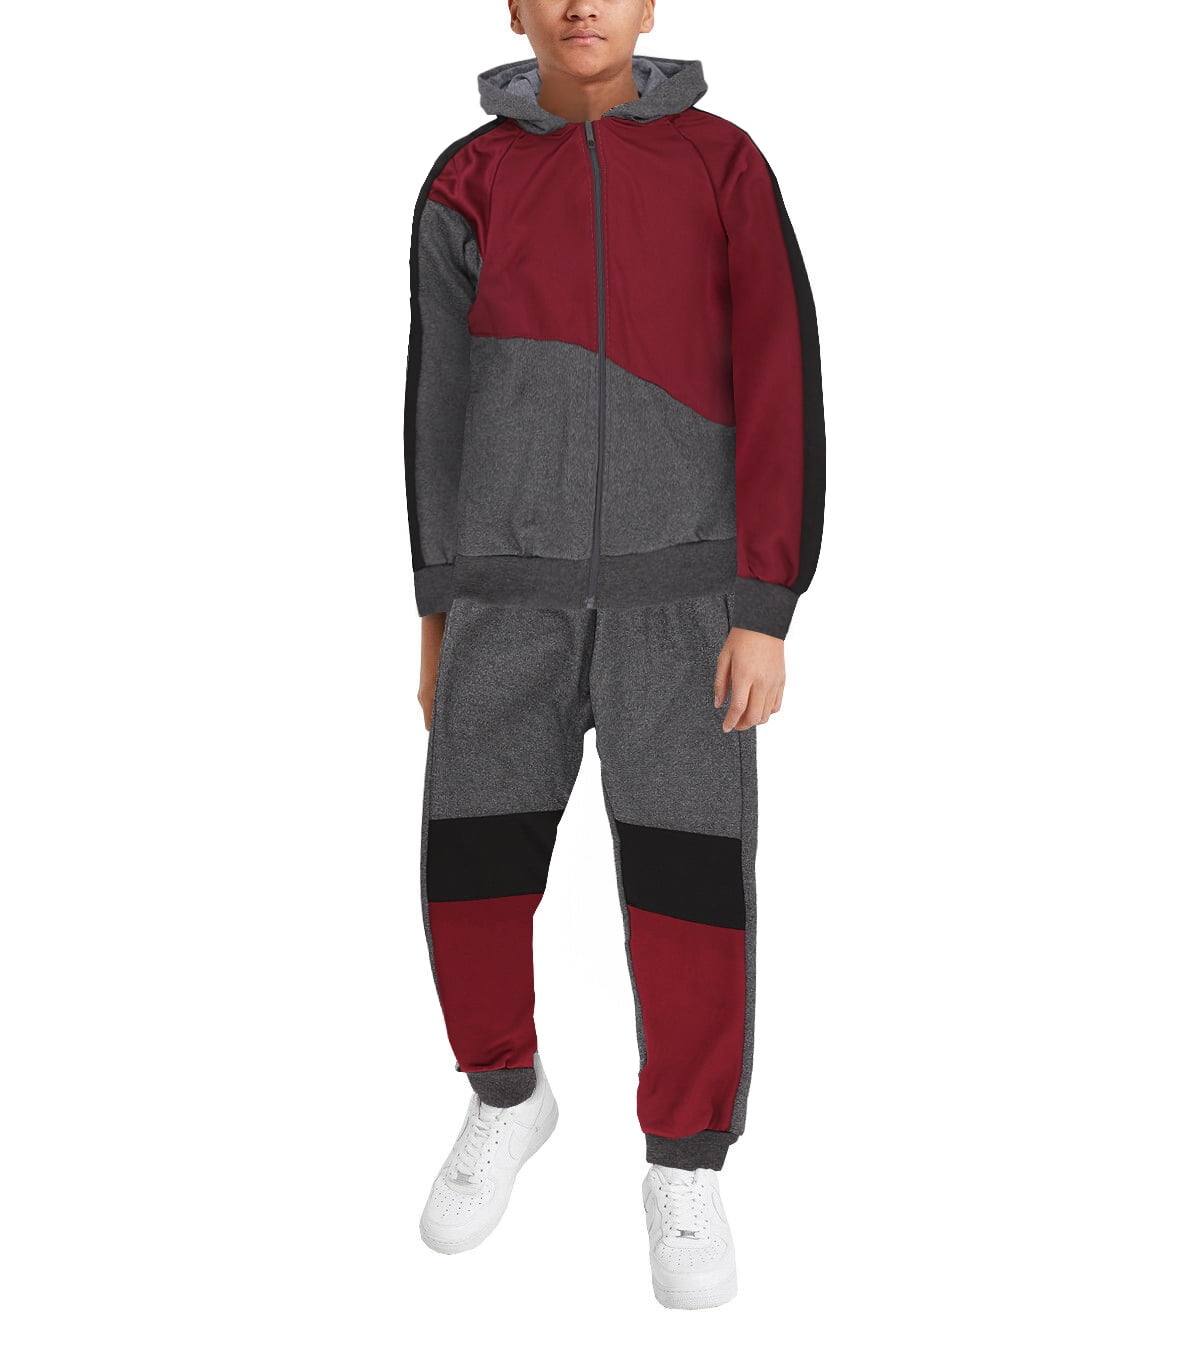 X-Future Men 2 Piece Hooded Thicken Sports Winter Athletic Lined Tracksuit Outfit Set